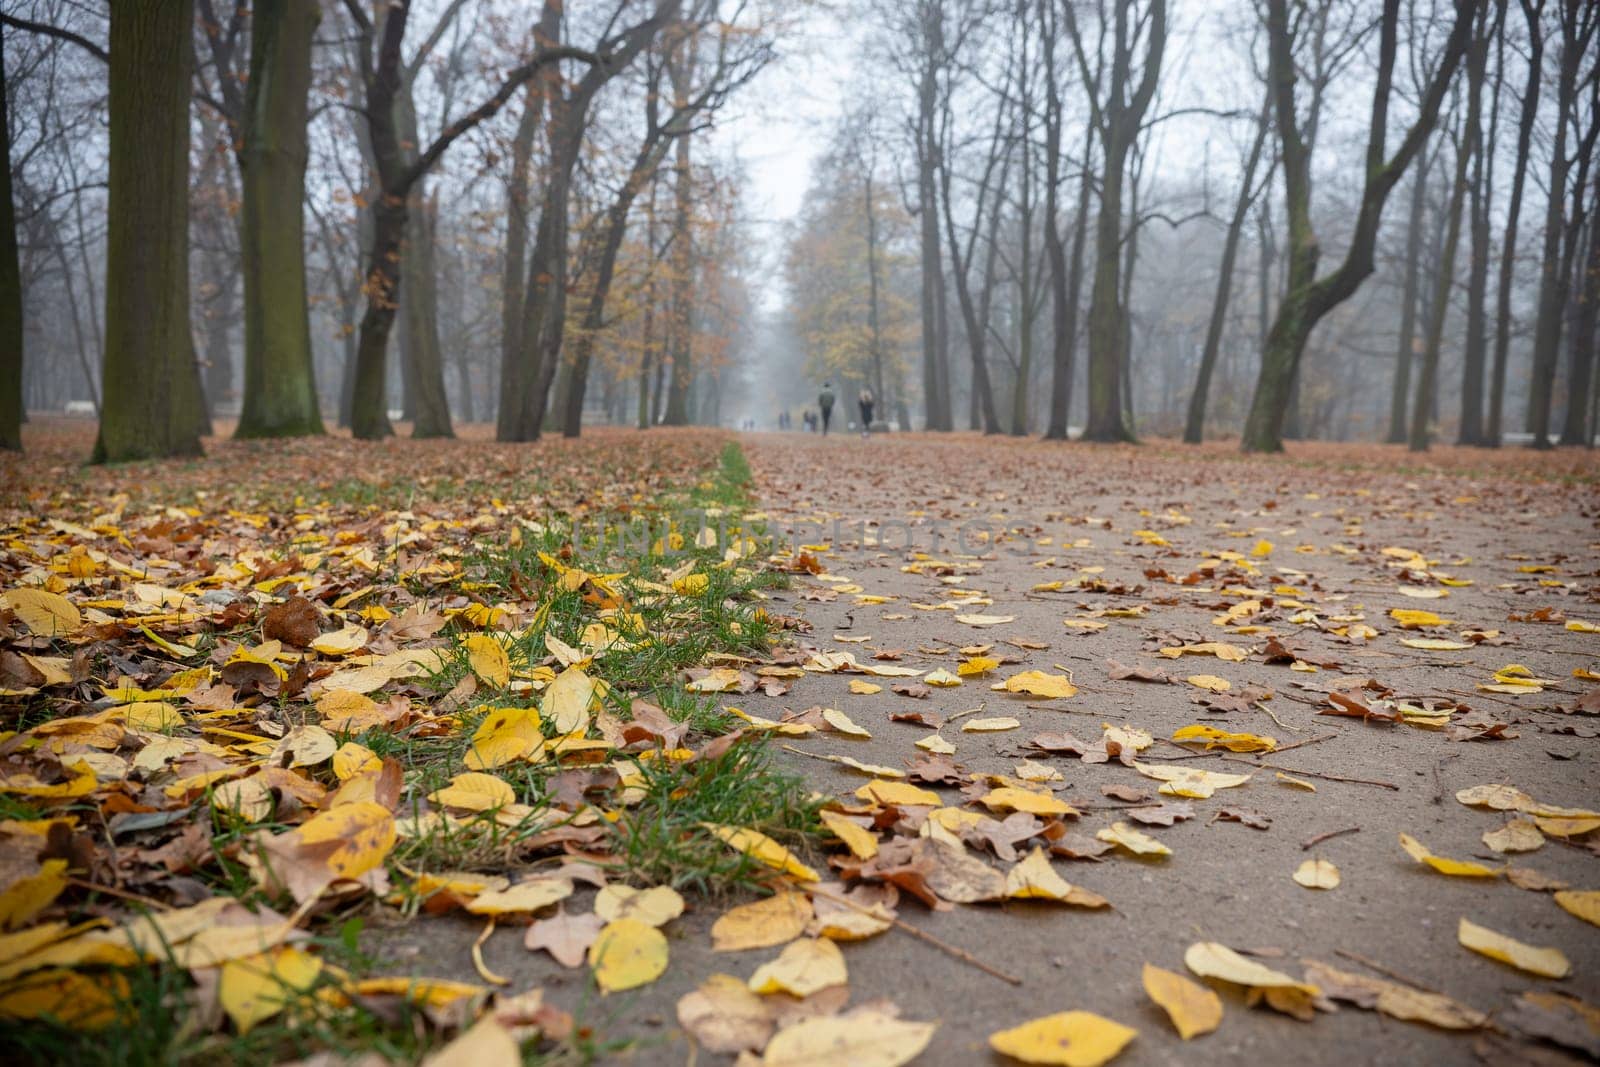 A pathway in a park, marked by the presence of numerous fallen autumn leaves.